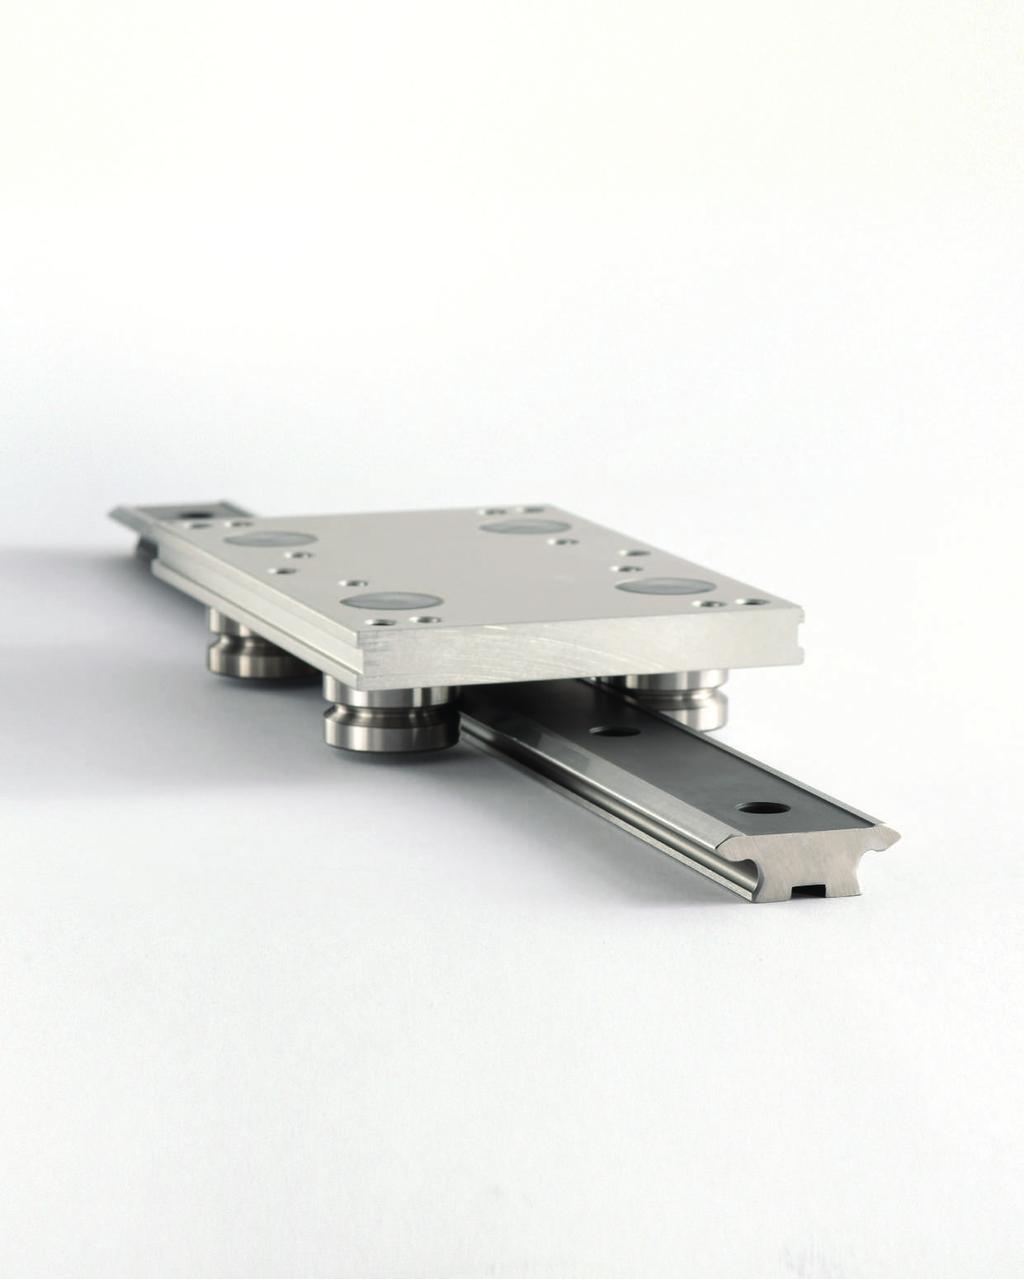 GV3 Linear Guide System 0 10,000N 0 8m/s GV3 is a superior linear motion system designed to serve a diverse range of